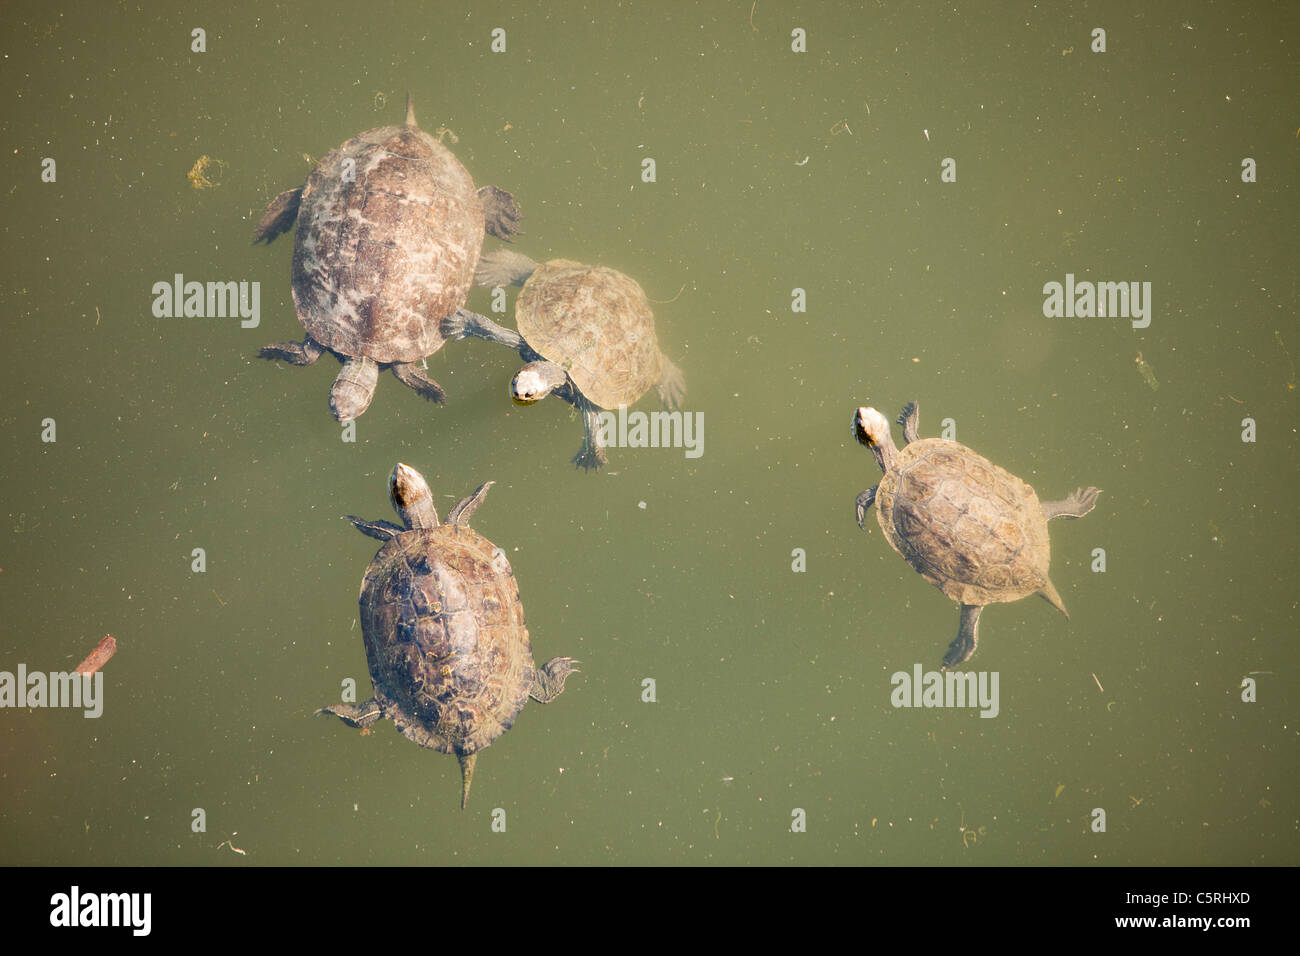 Striped Necked Terrapins (Mauremys caspica) in a river in Skala eresou, Lesbos, Greece. Stock Photo